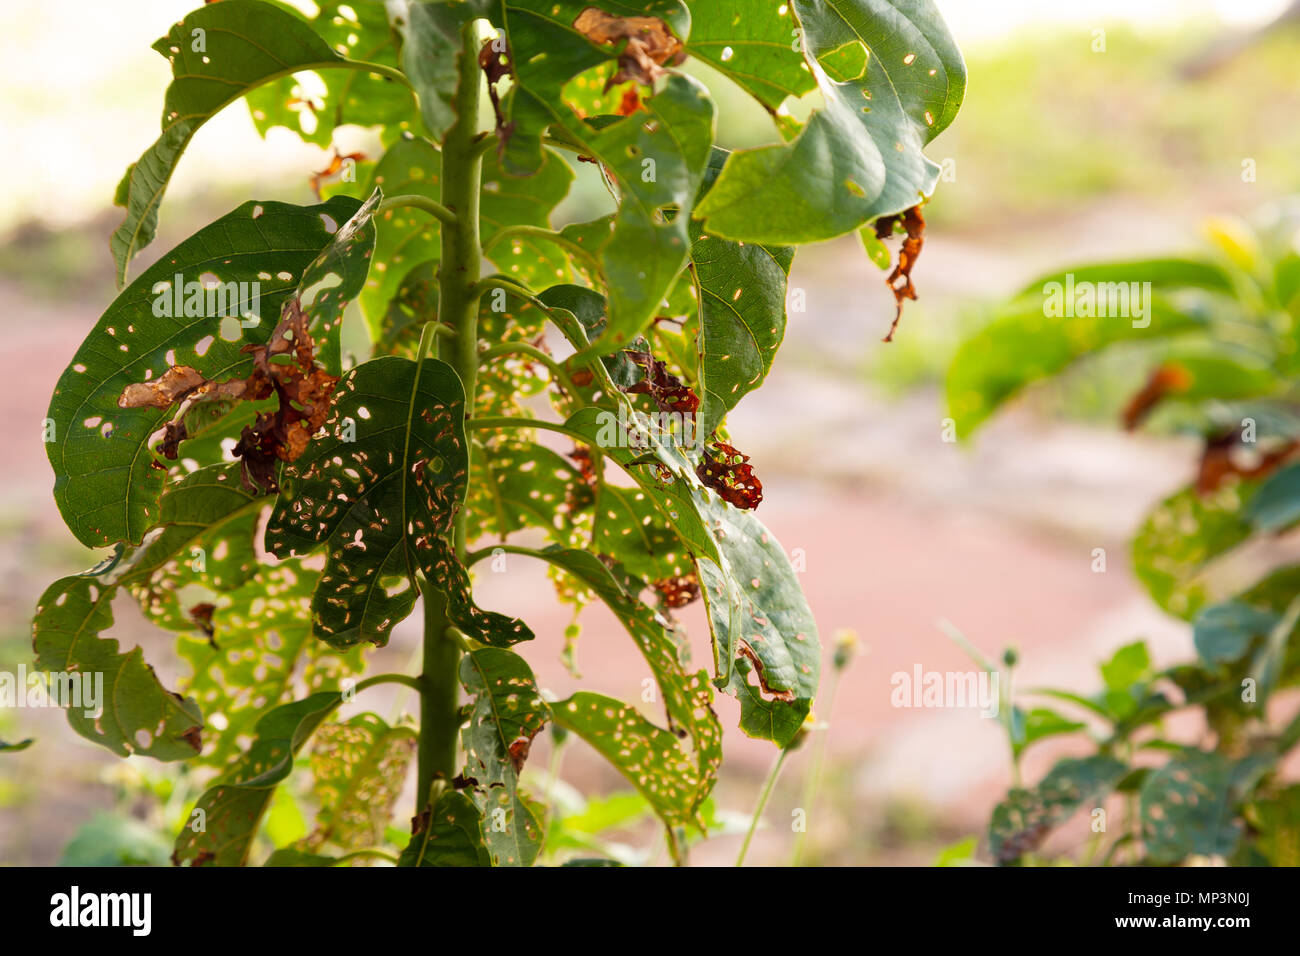 Avocado tree leaves covered with holes, young growing plant spot disease, Asuncion, Paraguay Stock Photo